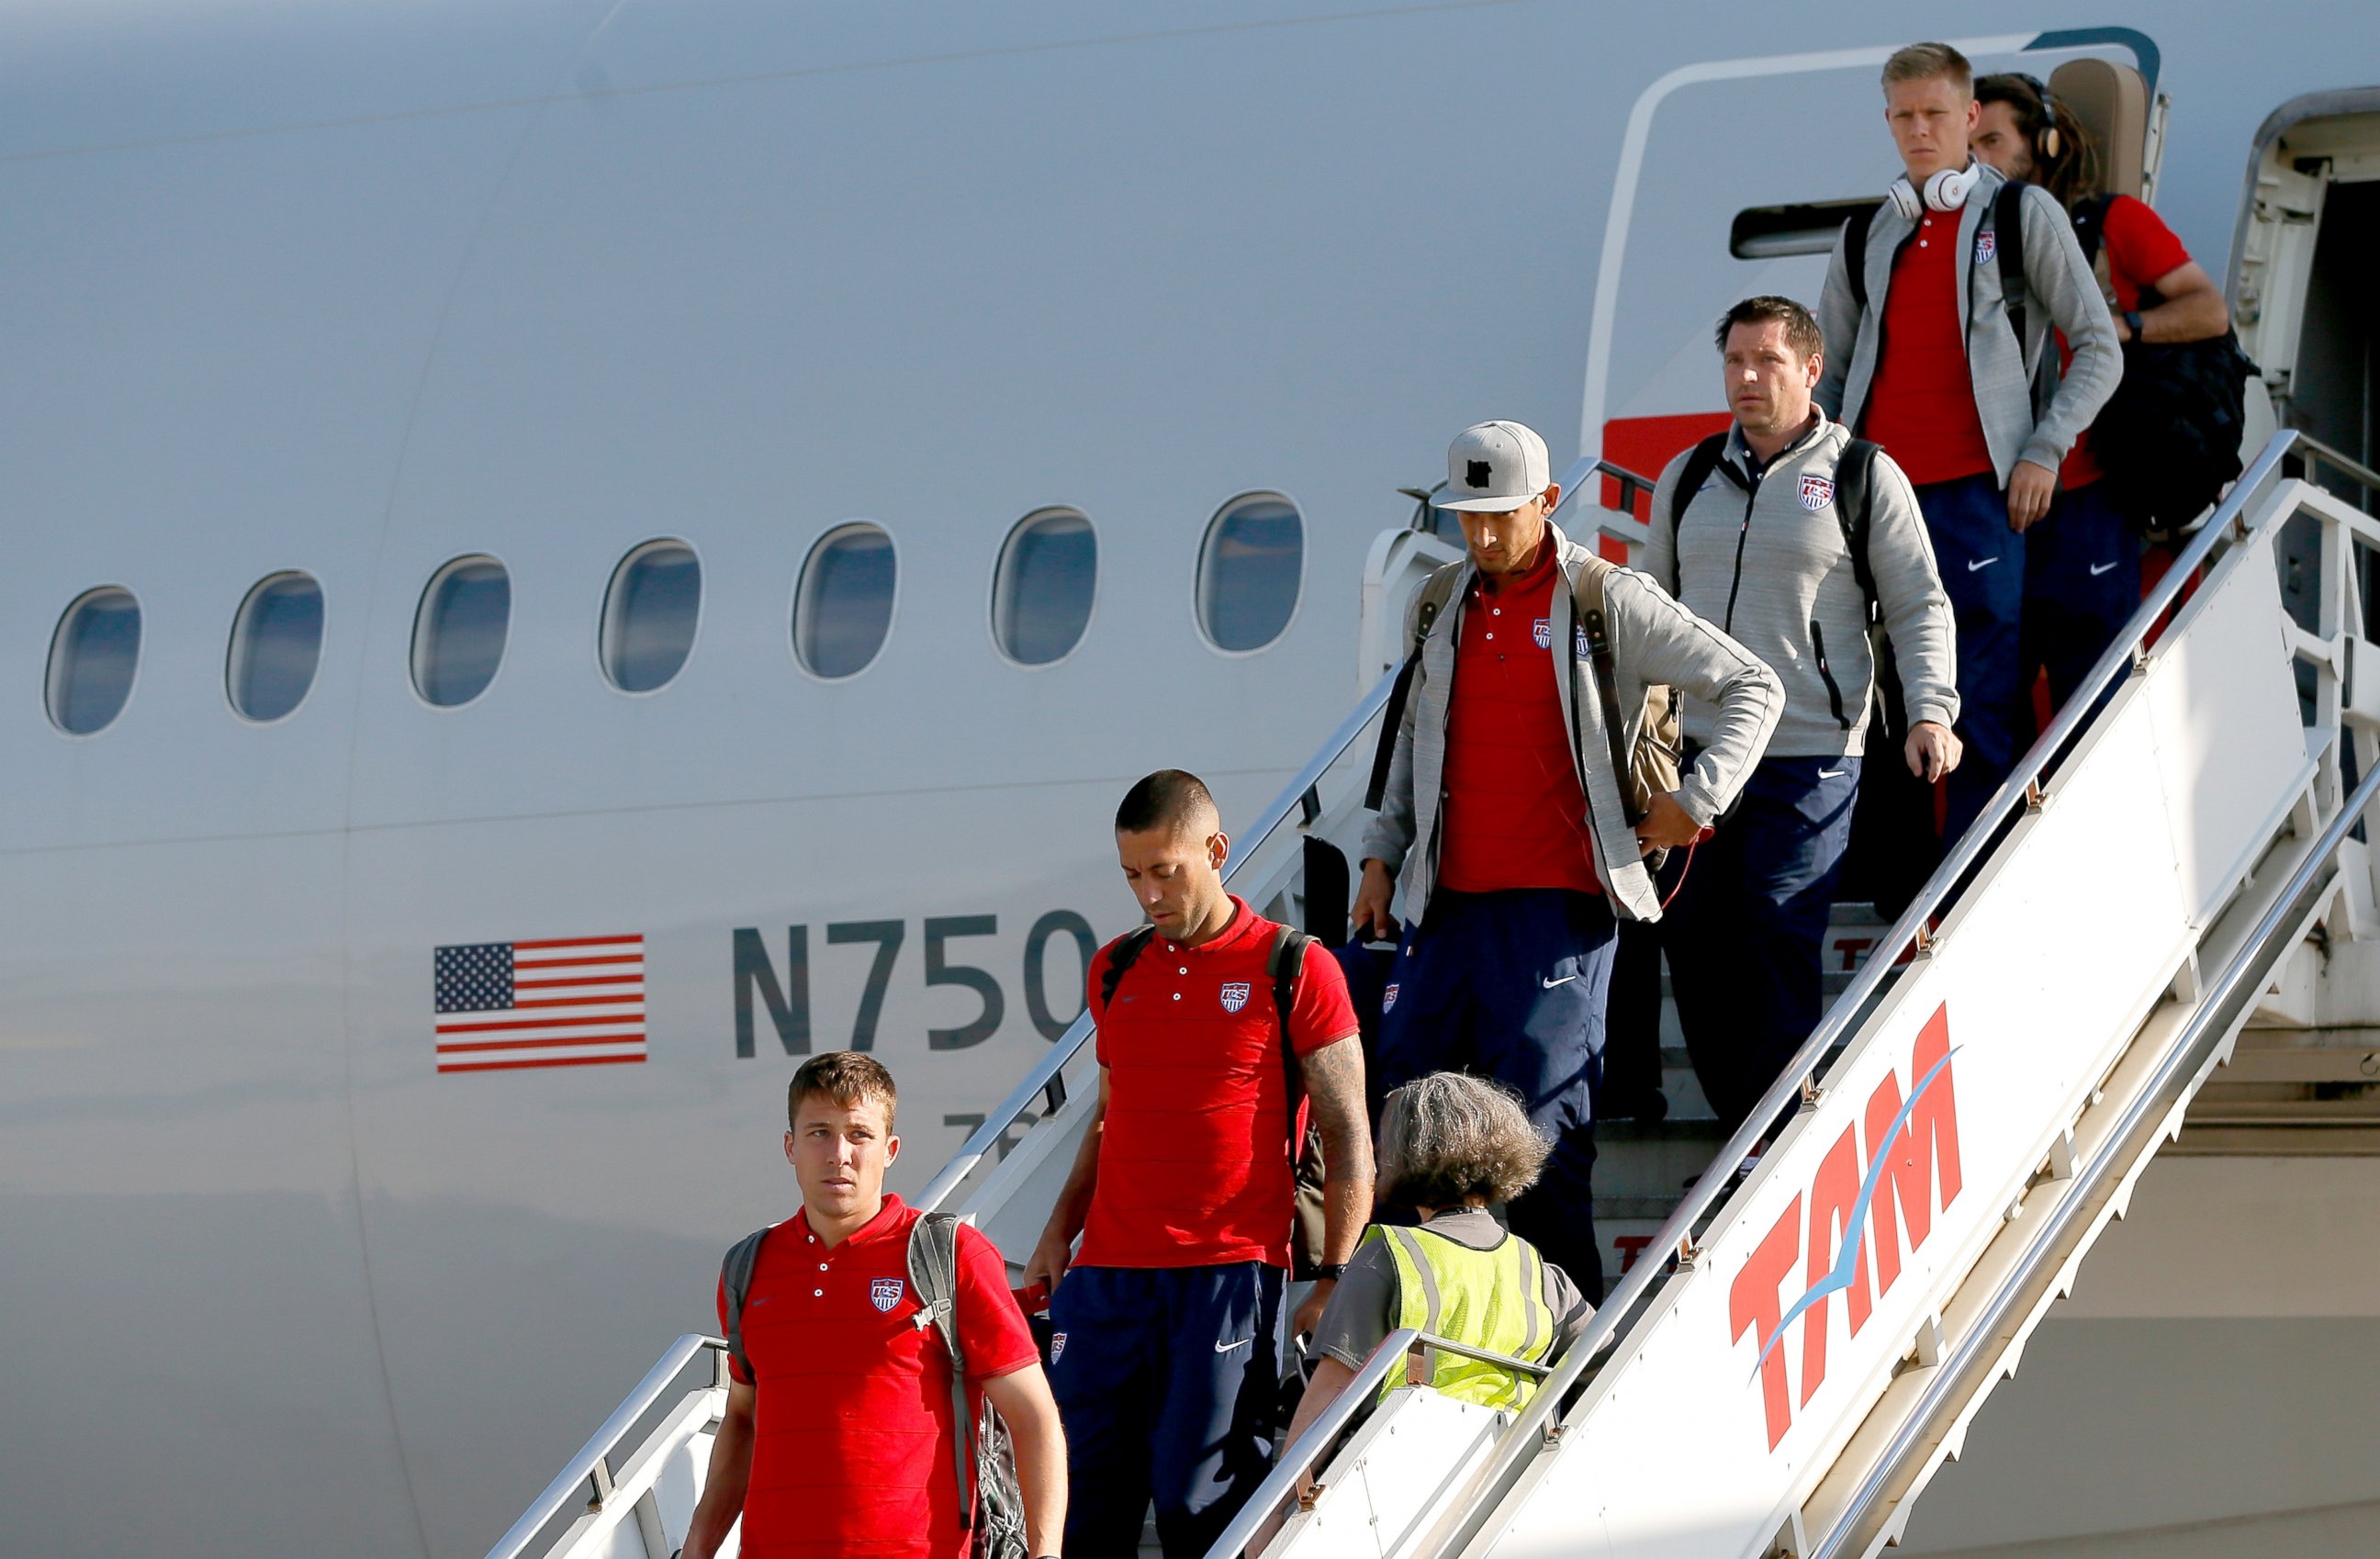 PHOTO: Team United States arrive at Sao Paulo International Airport, June 9, 2014 in Sao Paulo, Brazil ahead of the 2014 FIFA World Cup.